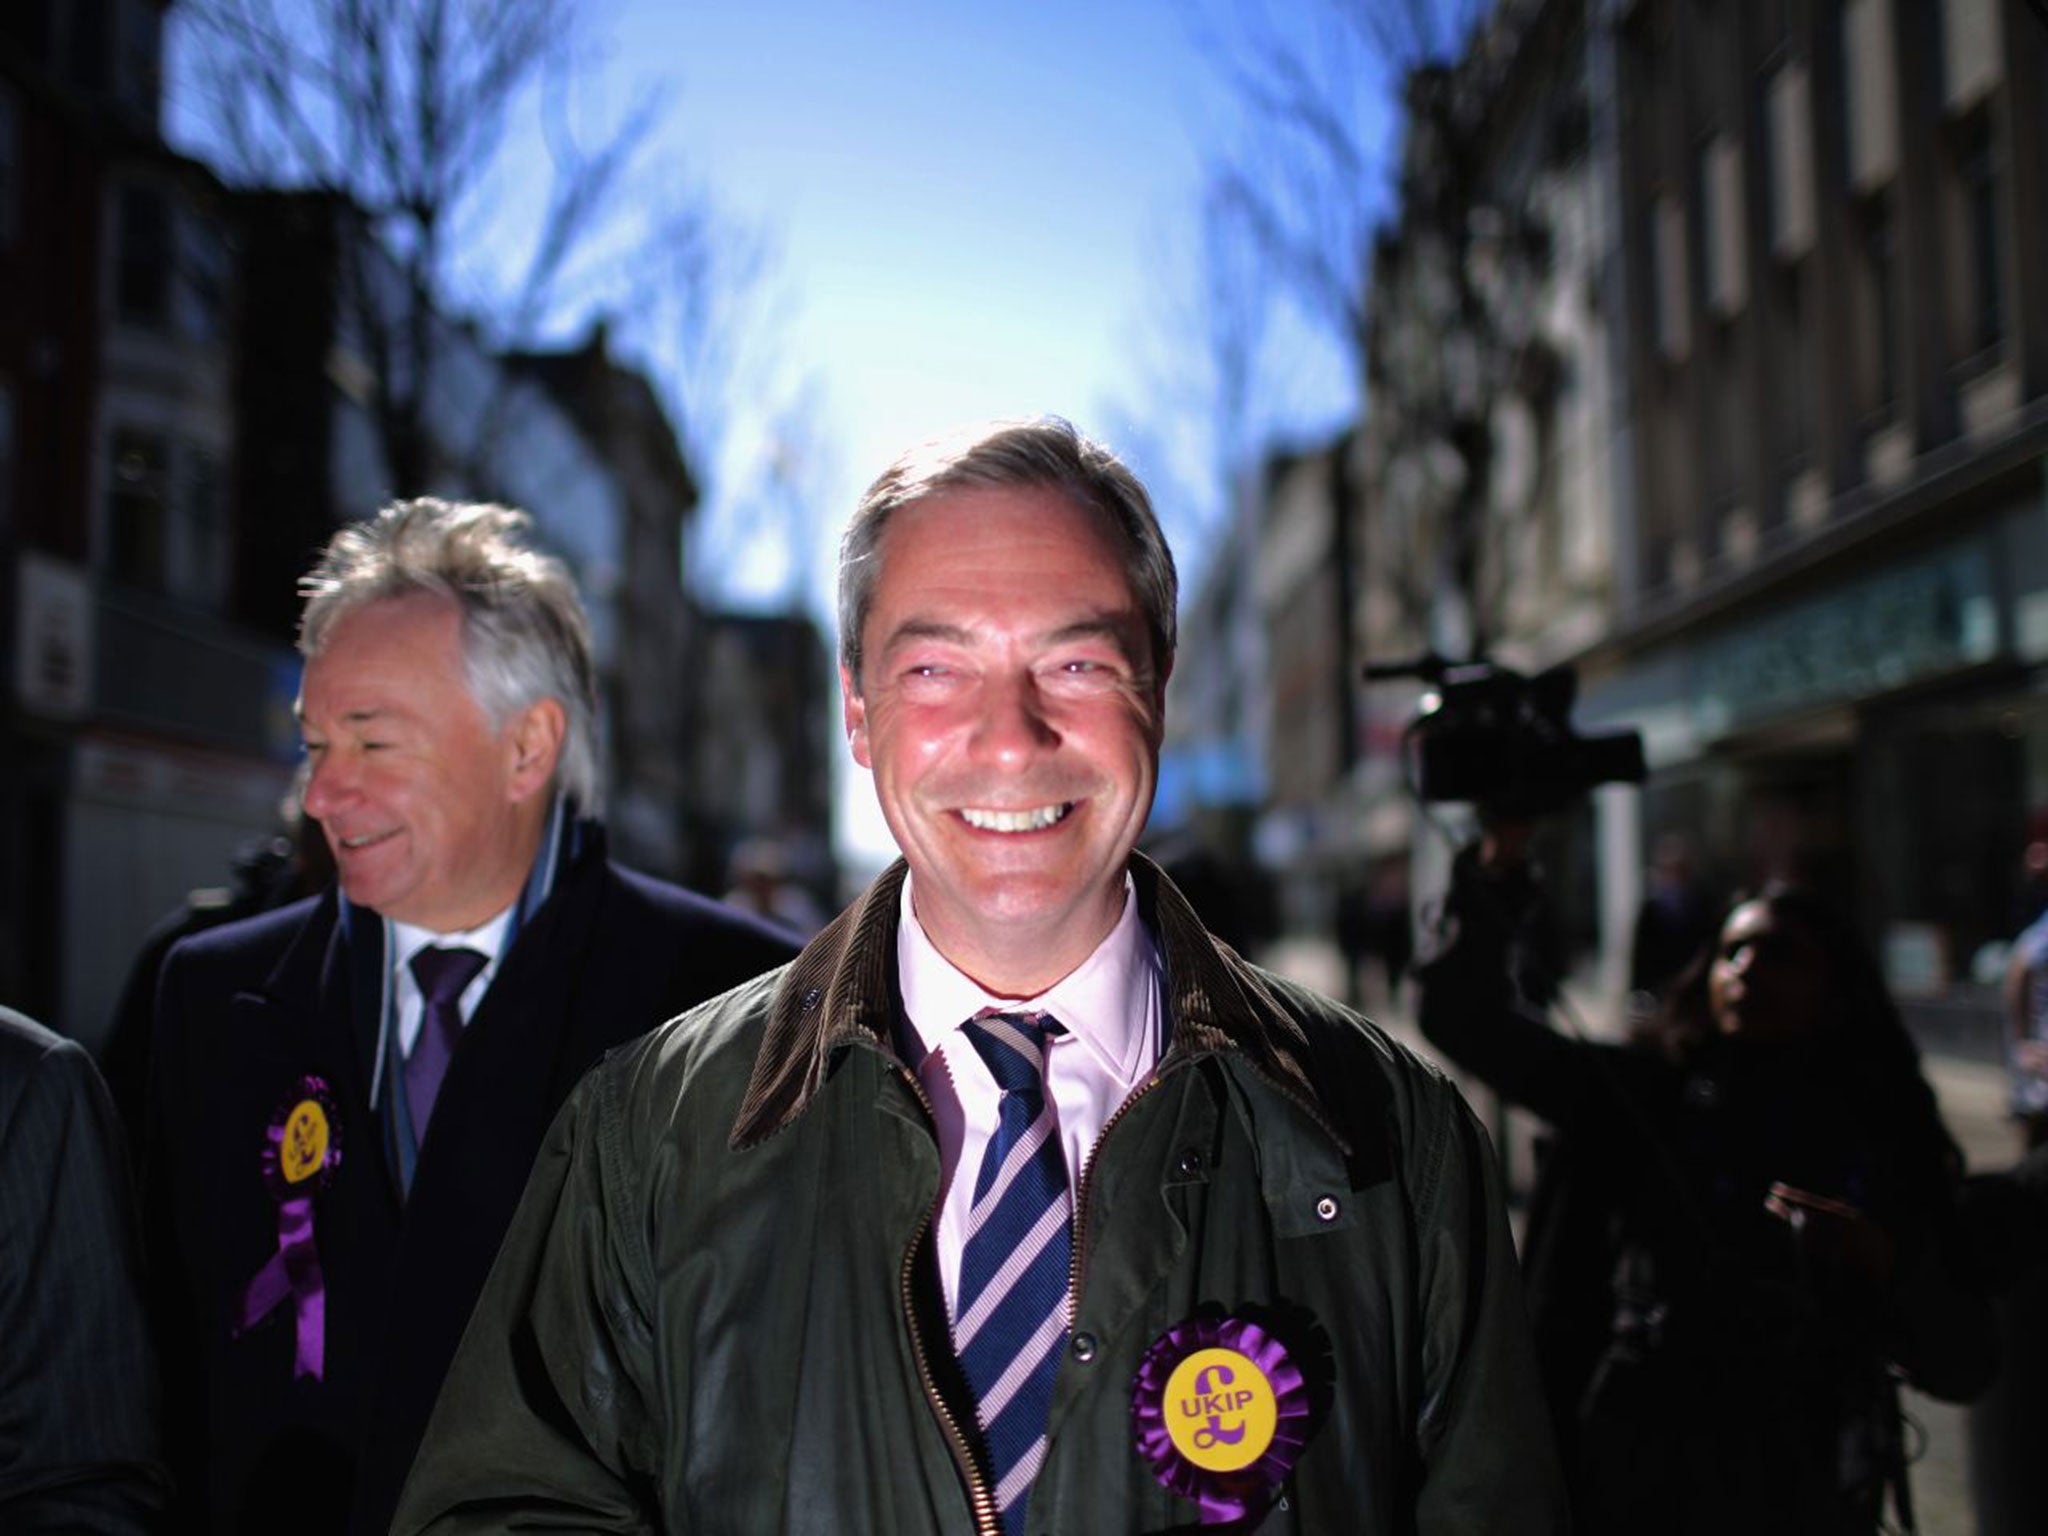 A survey yesterday for a local paper found Ukip support at 21 per cent in Southampton